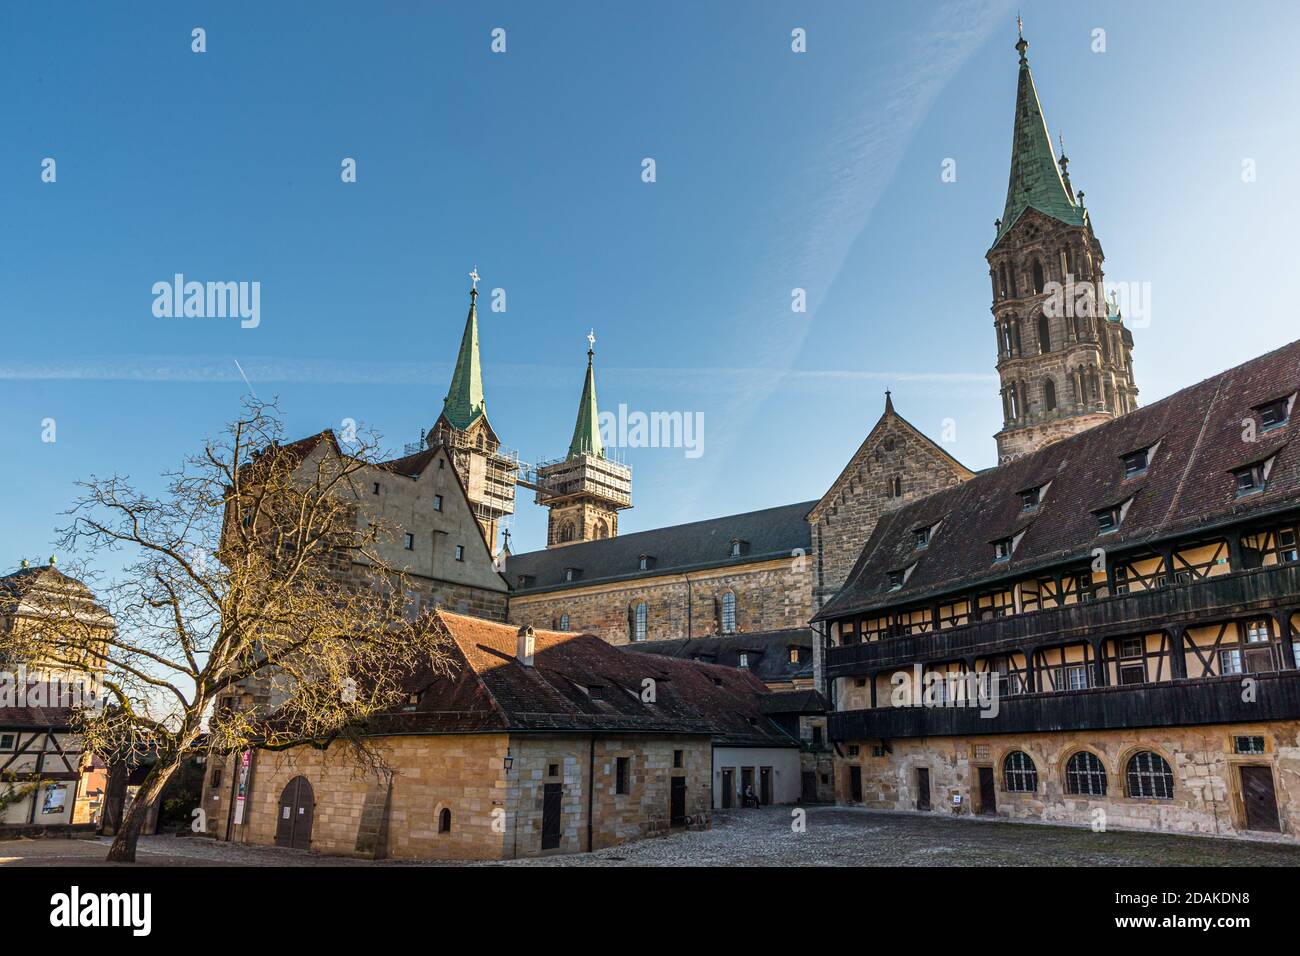 The towers of Bamberg Cathedral St. Peter and St. George covered in scaffolds. Bamberg Cathedral, Germany (Bamberger Dom St. Peter und St. Georg) Stock Photo